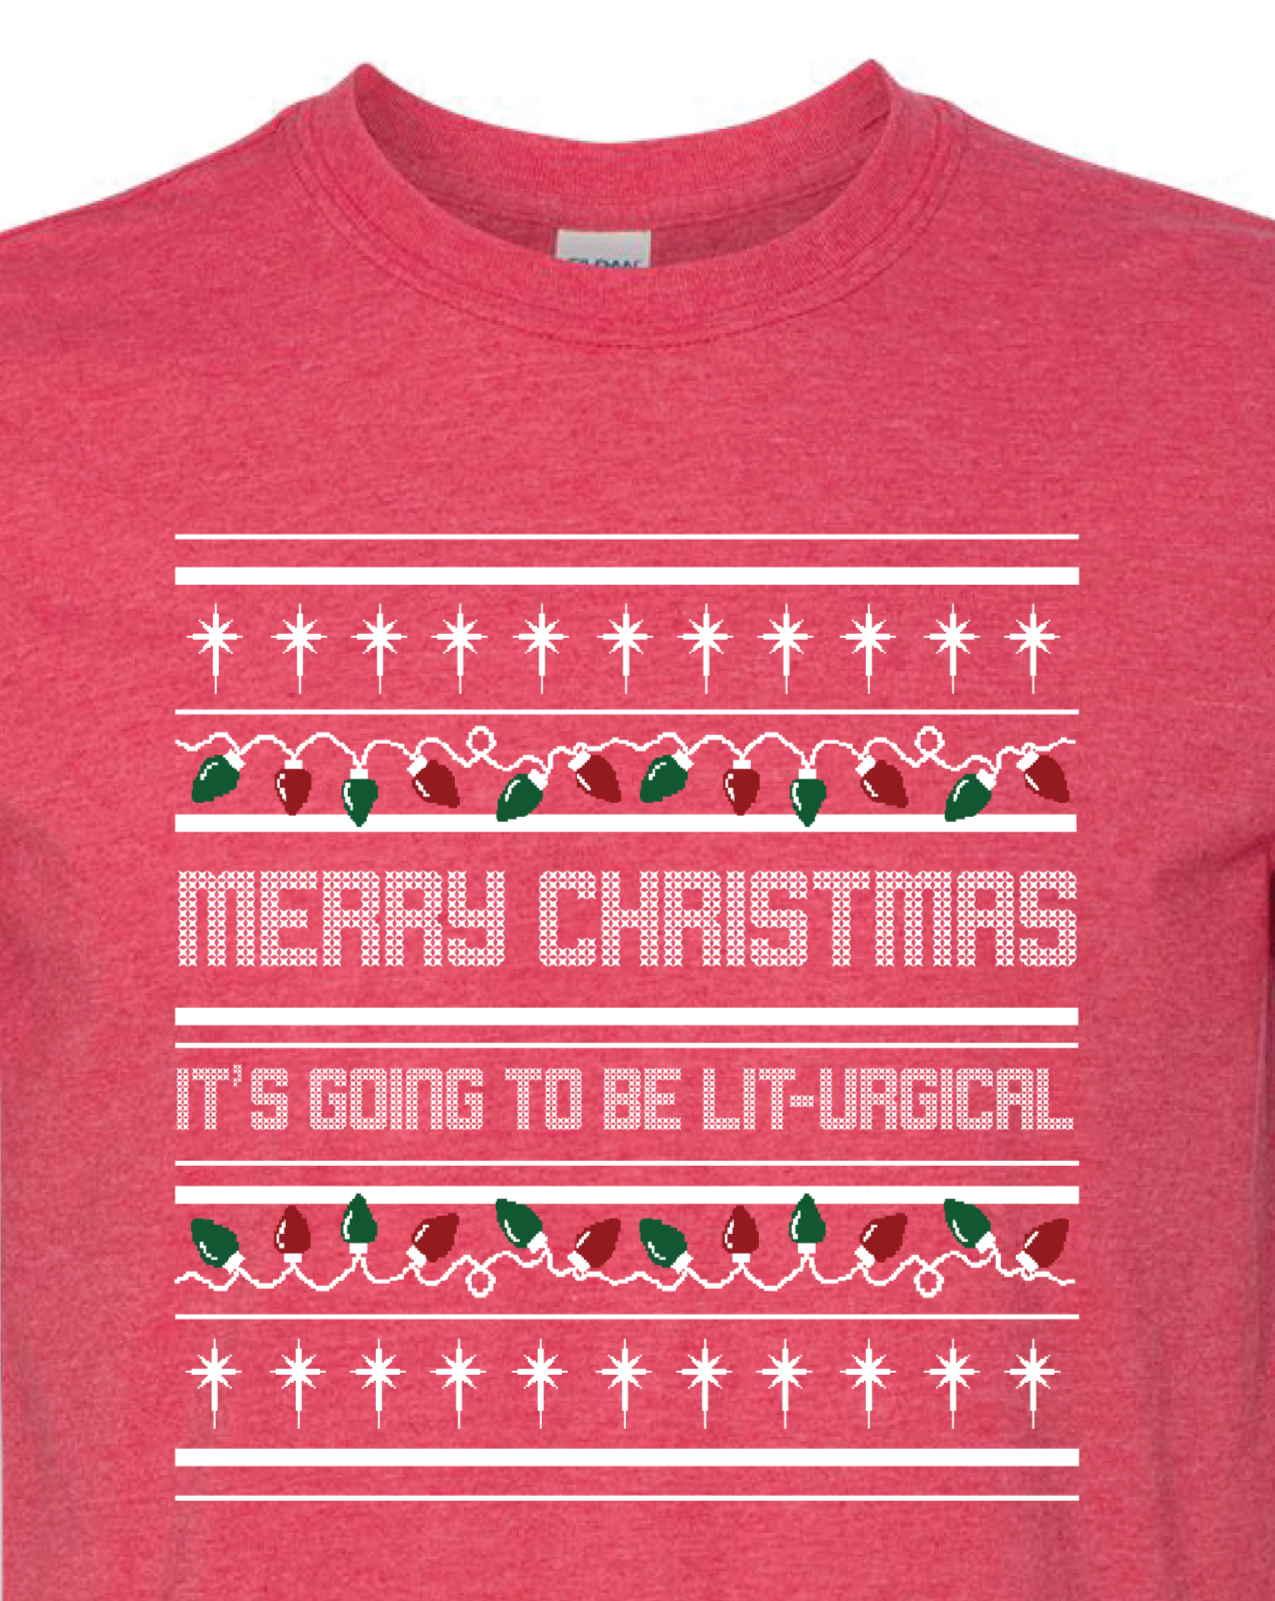 It's Going to be Lit-urgical! - Christmas T Shirt